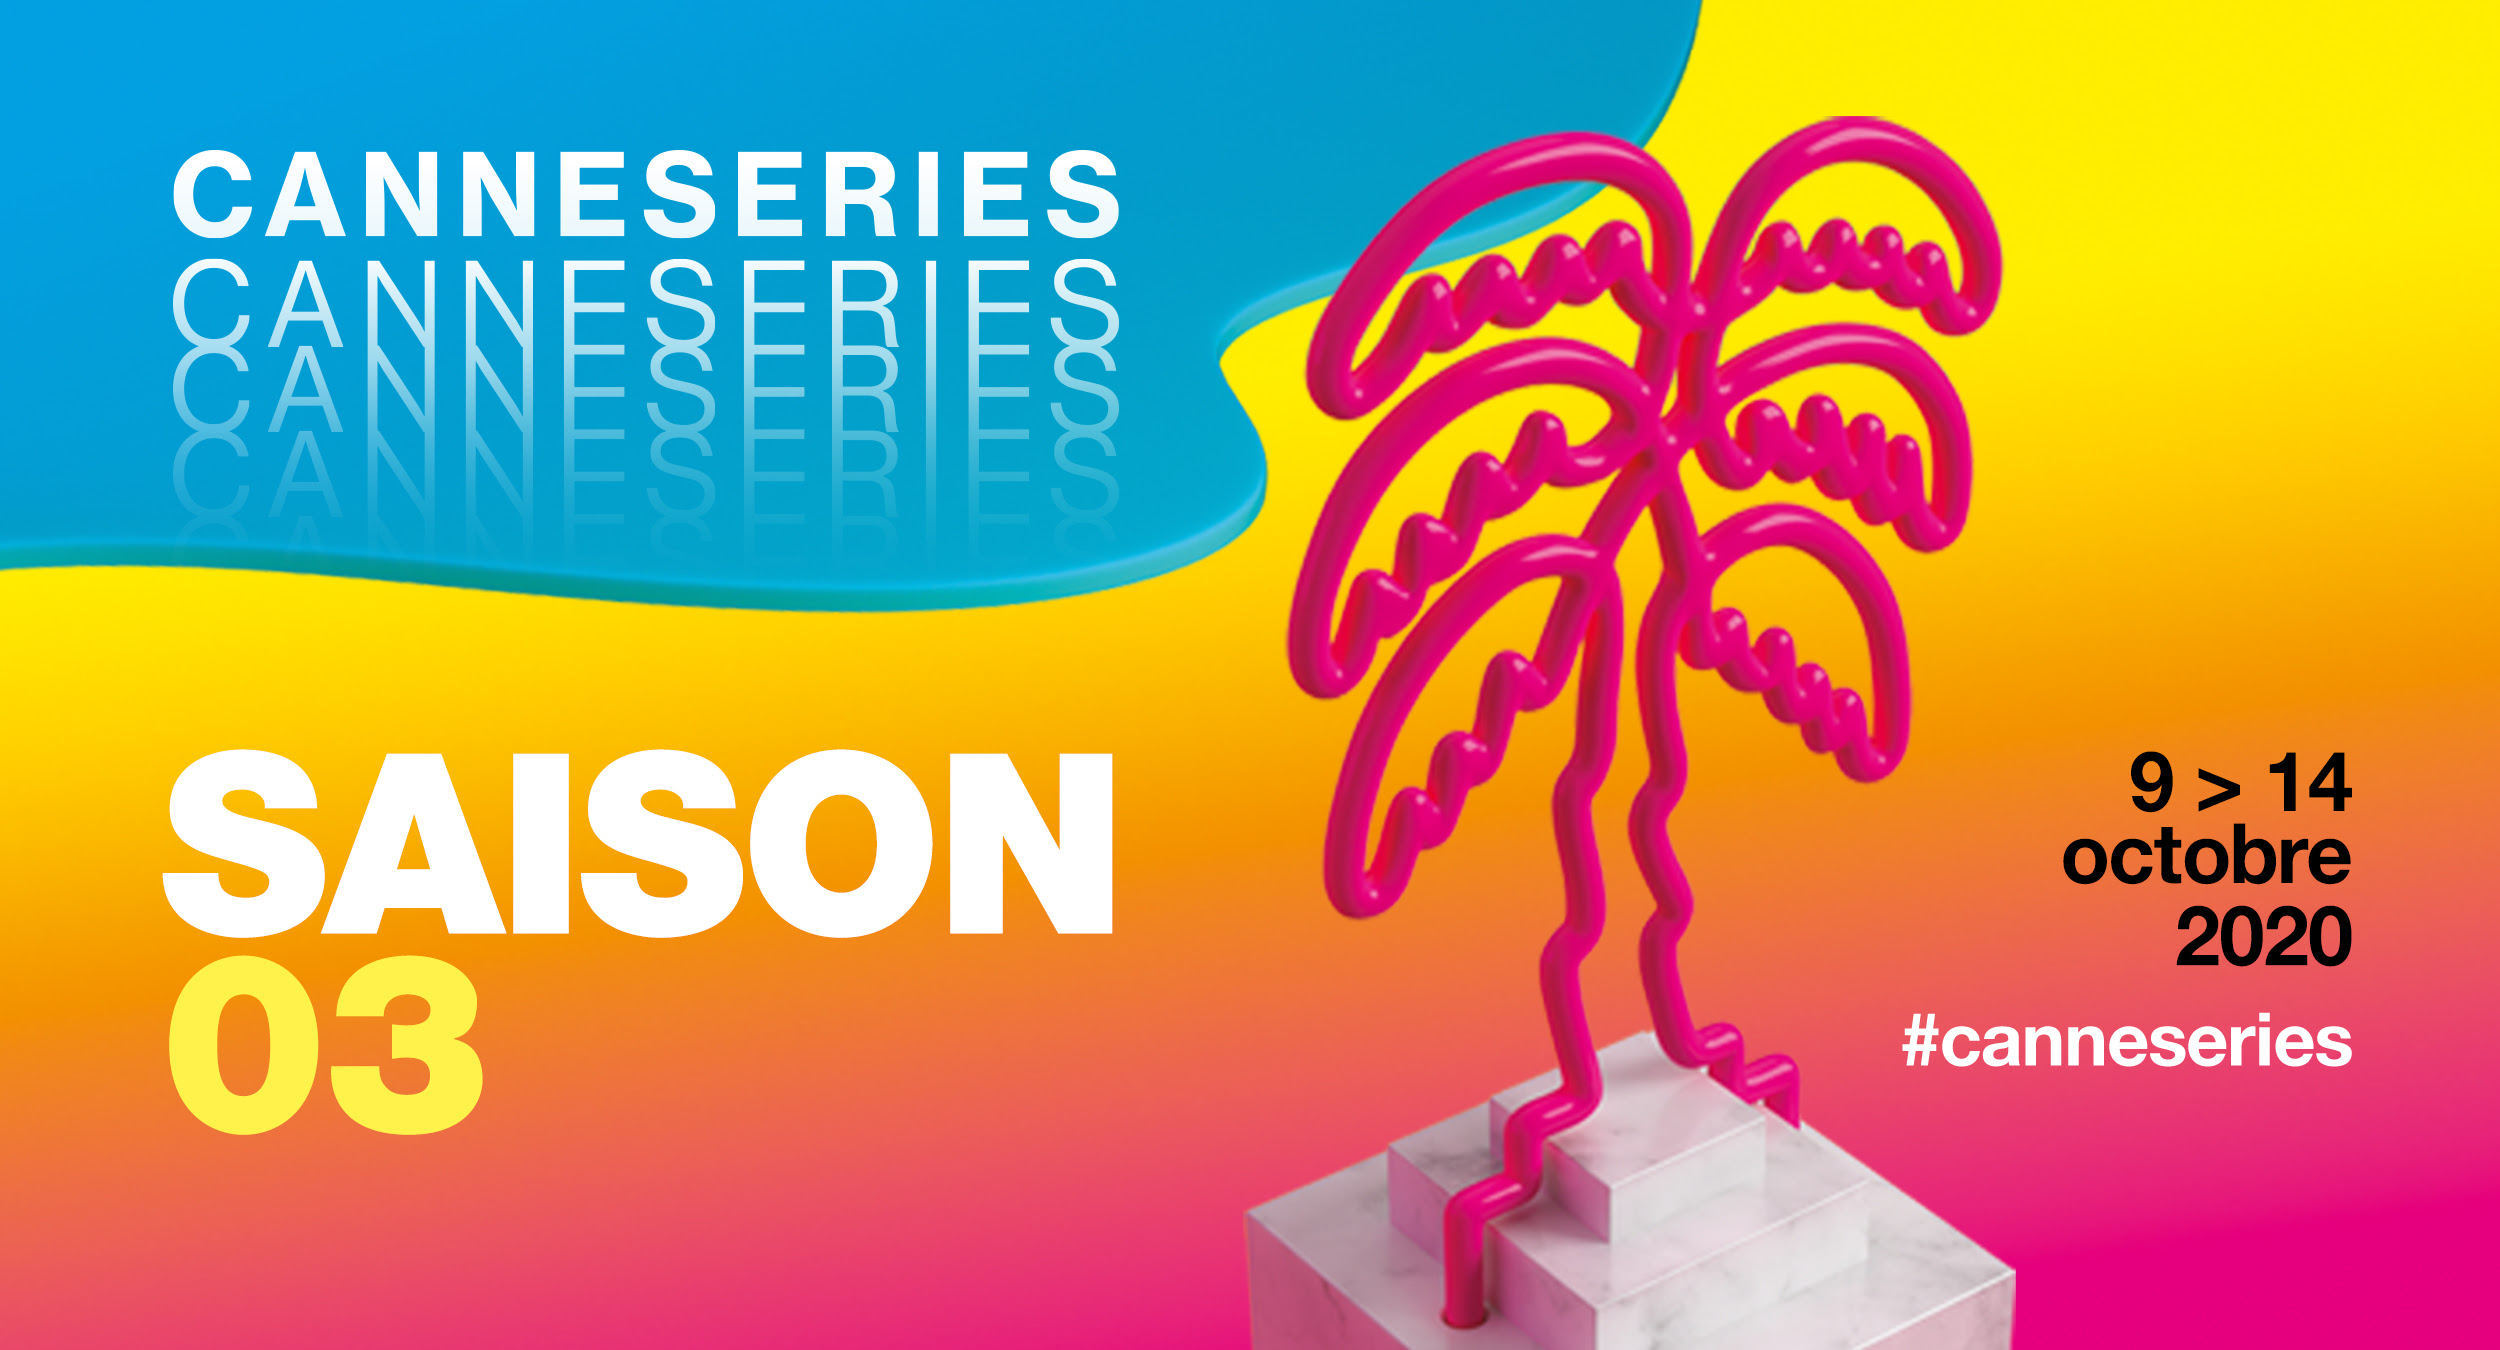 CANNESERIES S.03